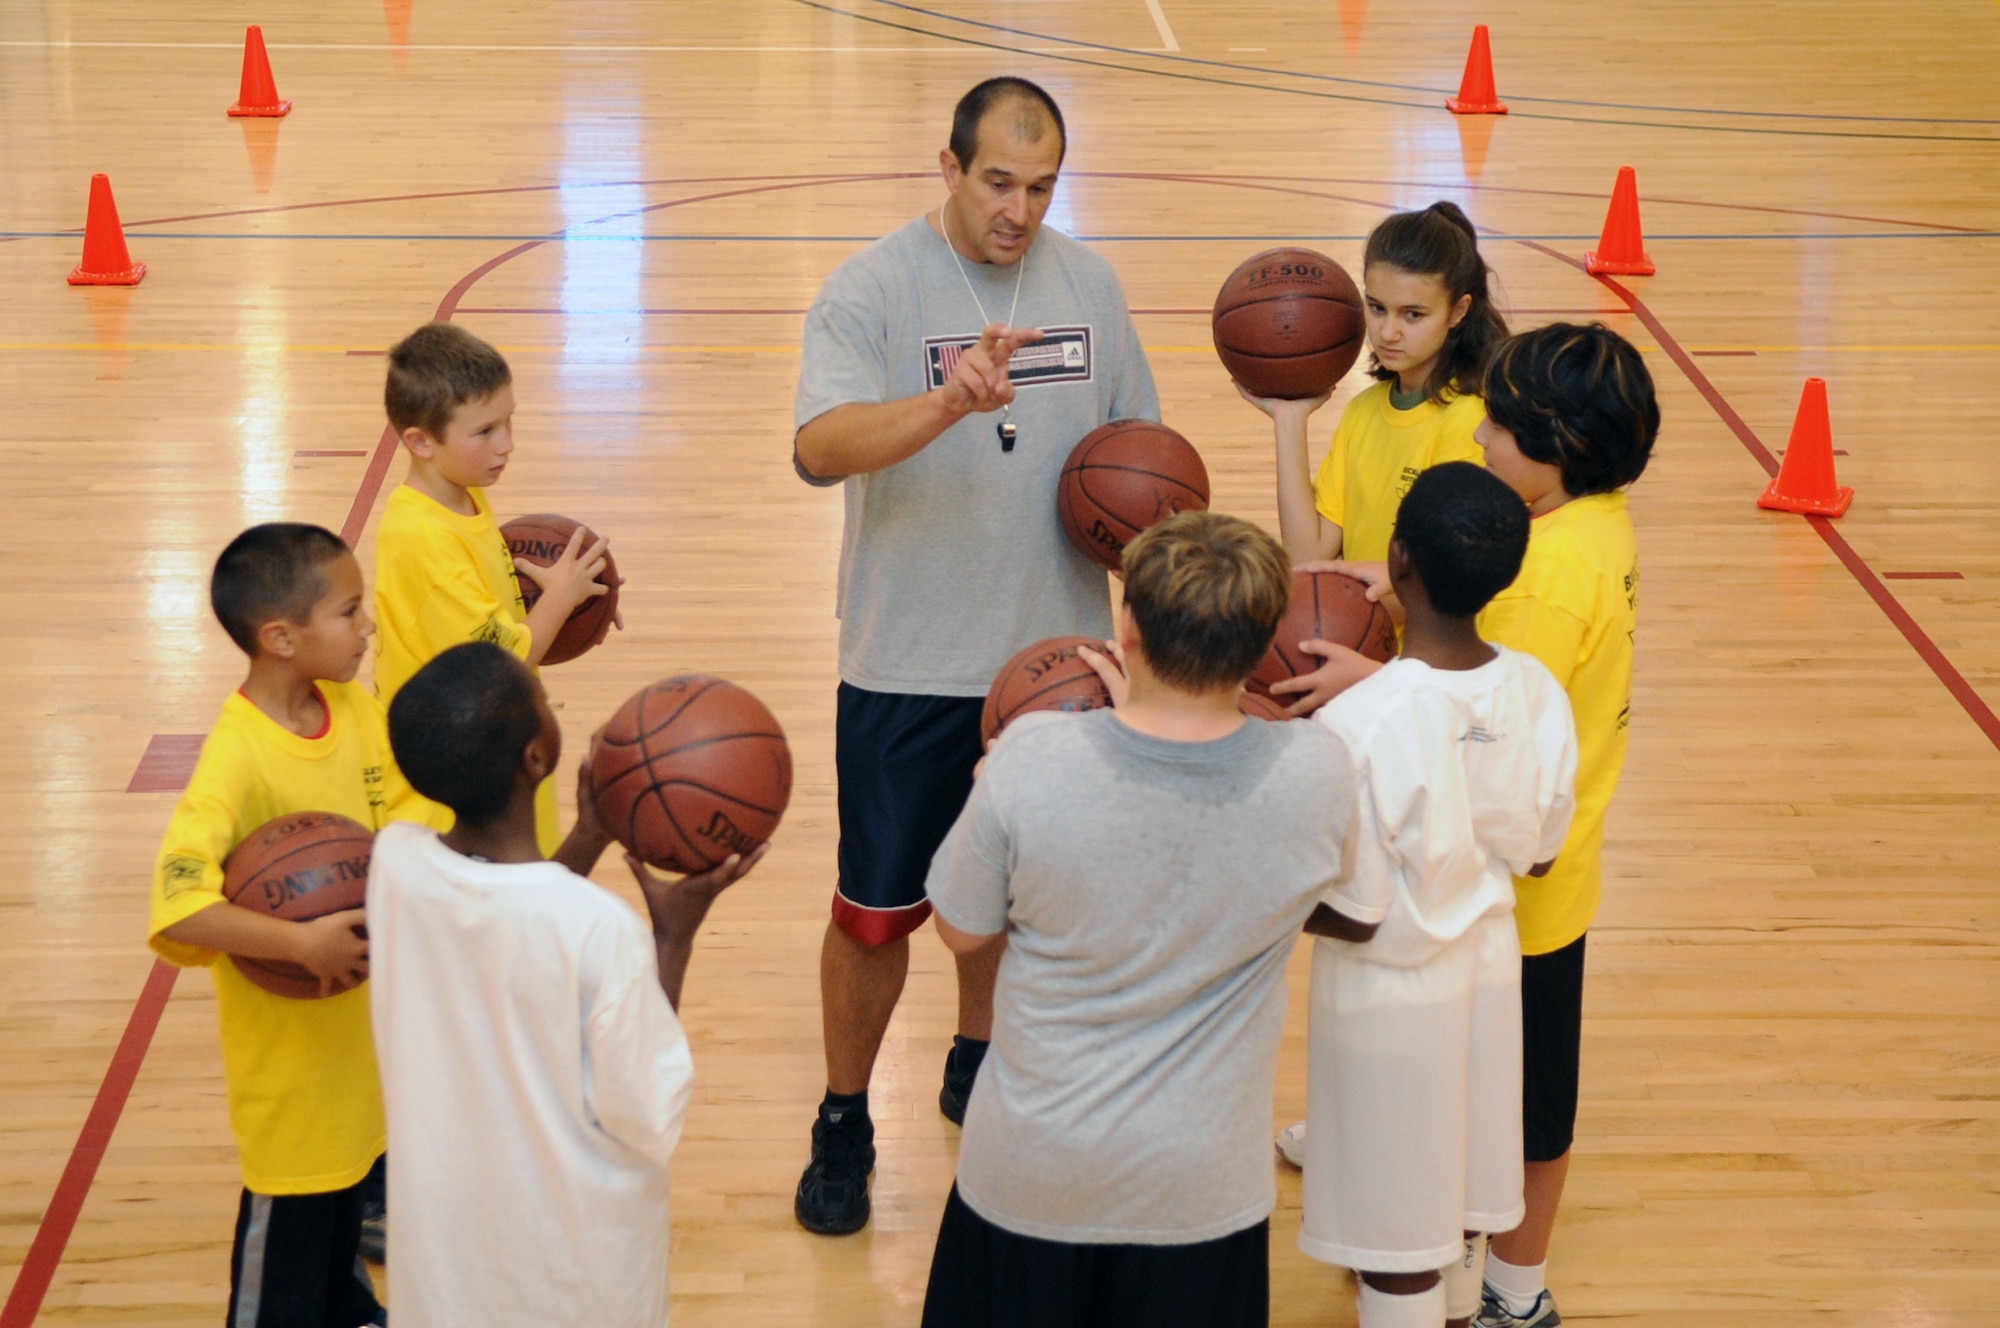 Tom Cox, 460th Force Support Squadron youth programs director, coaches Buckley youths on basketball fundamentals during a basketball clinic hosted by the 460th Force Support Squadron at the fitness center Oct. 17. (U.S. Air Force photo by Senior Airman John Easterling)